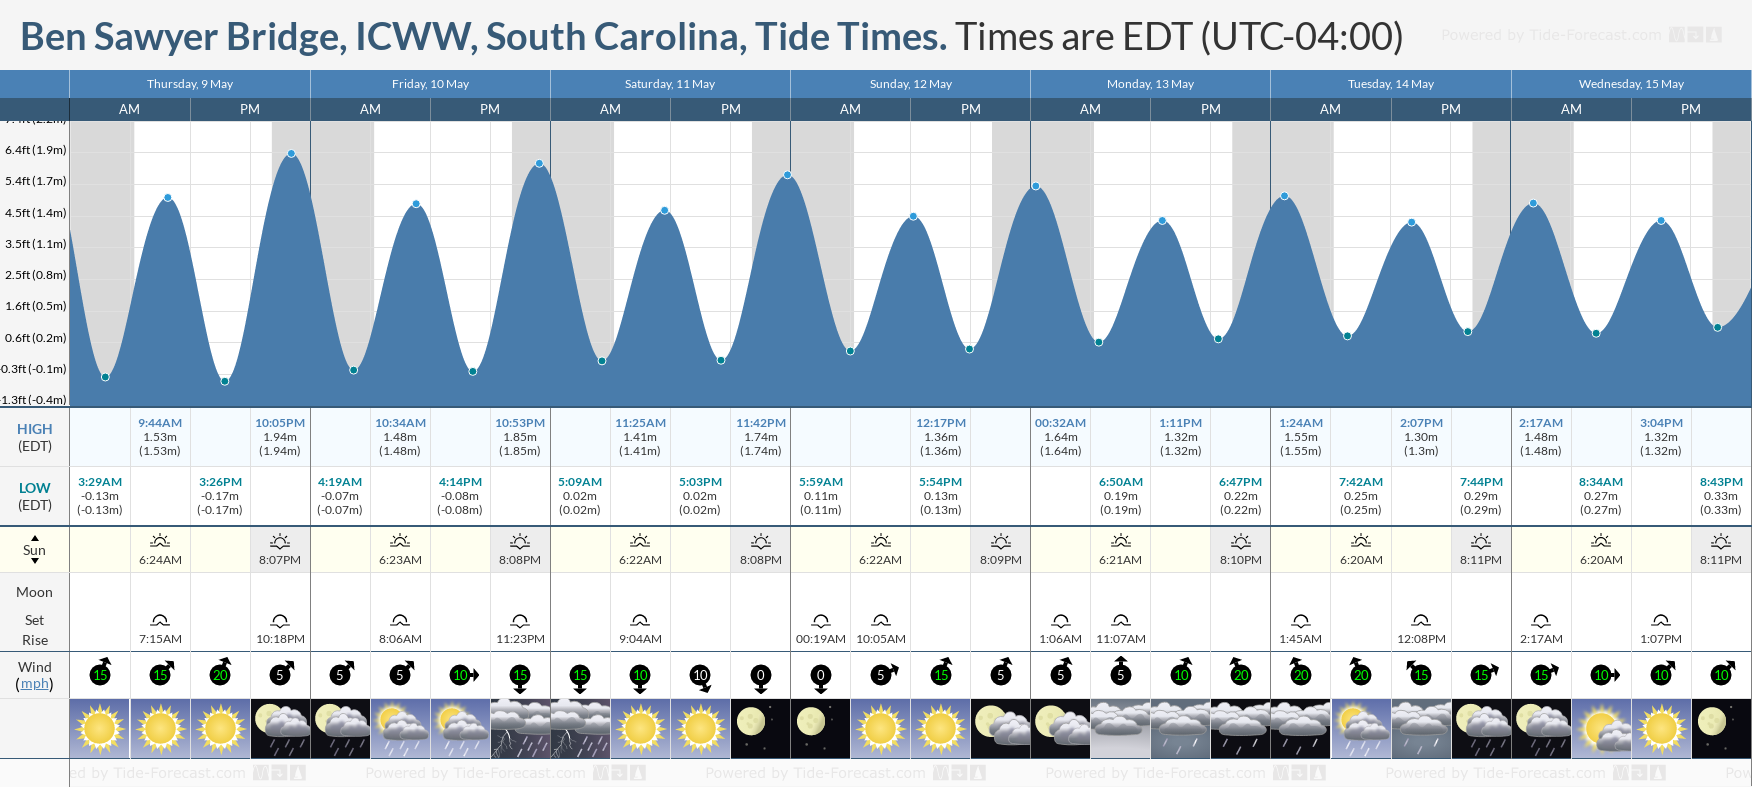 Ben Sawyer Bridge, ICWW, South Carolina Tide Chart including high and low tide times for the next 7 days